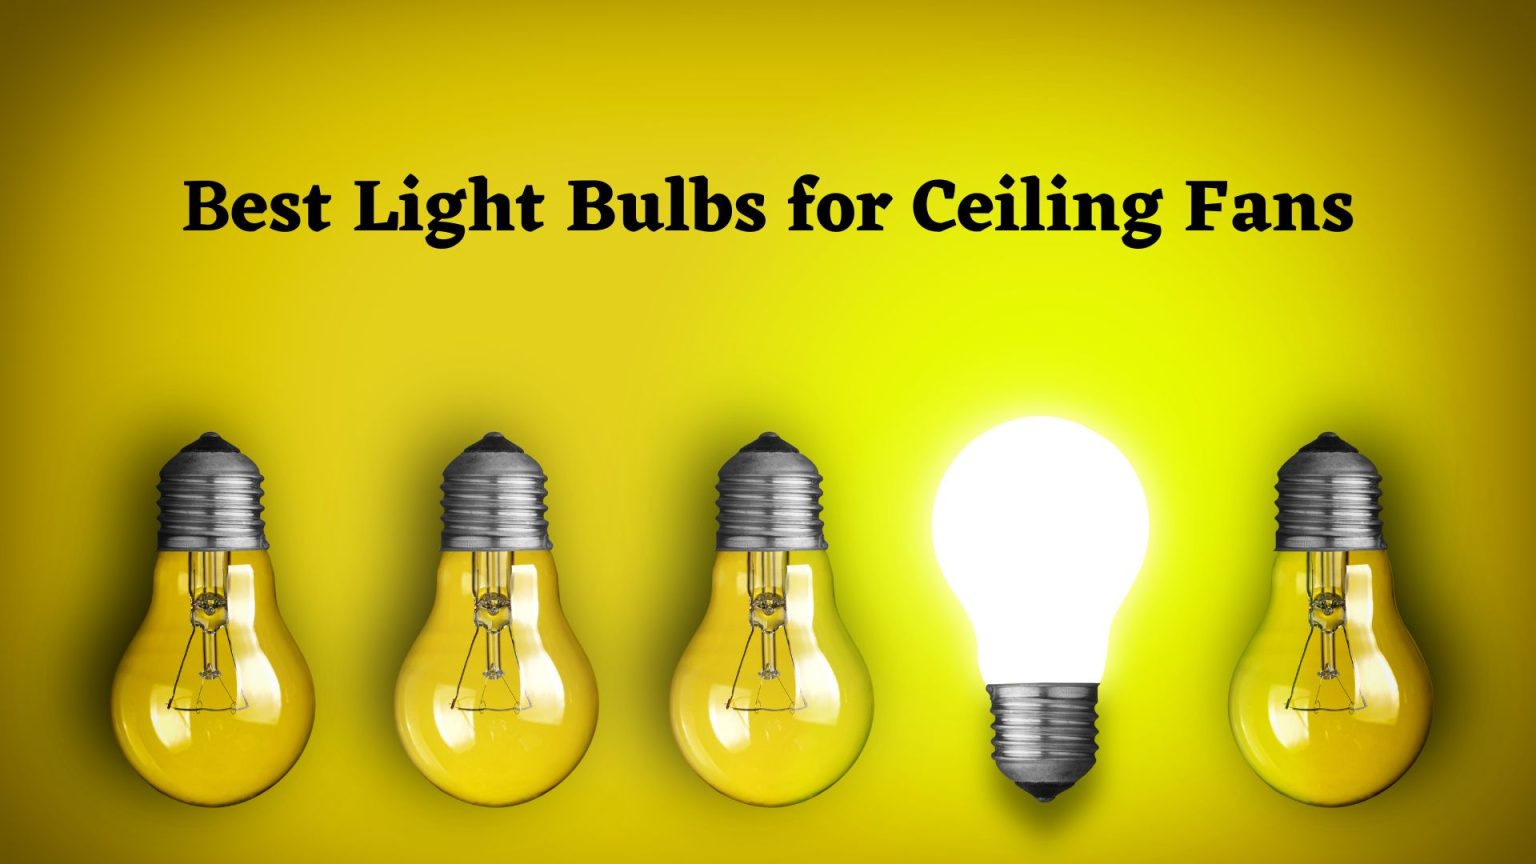 What are the best light bulbs for ceiling fans